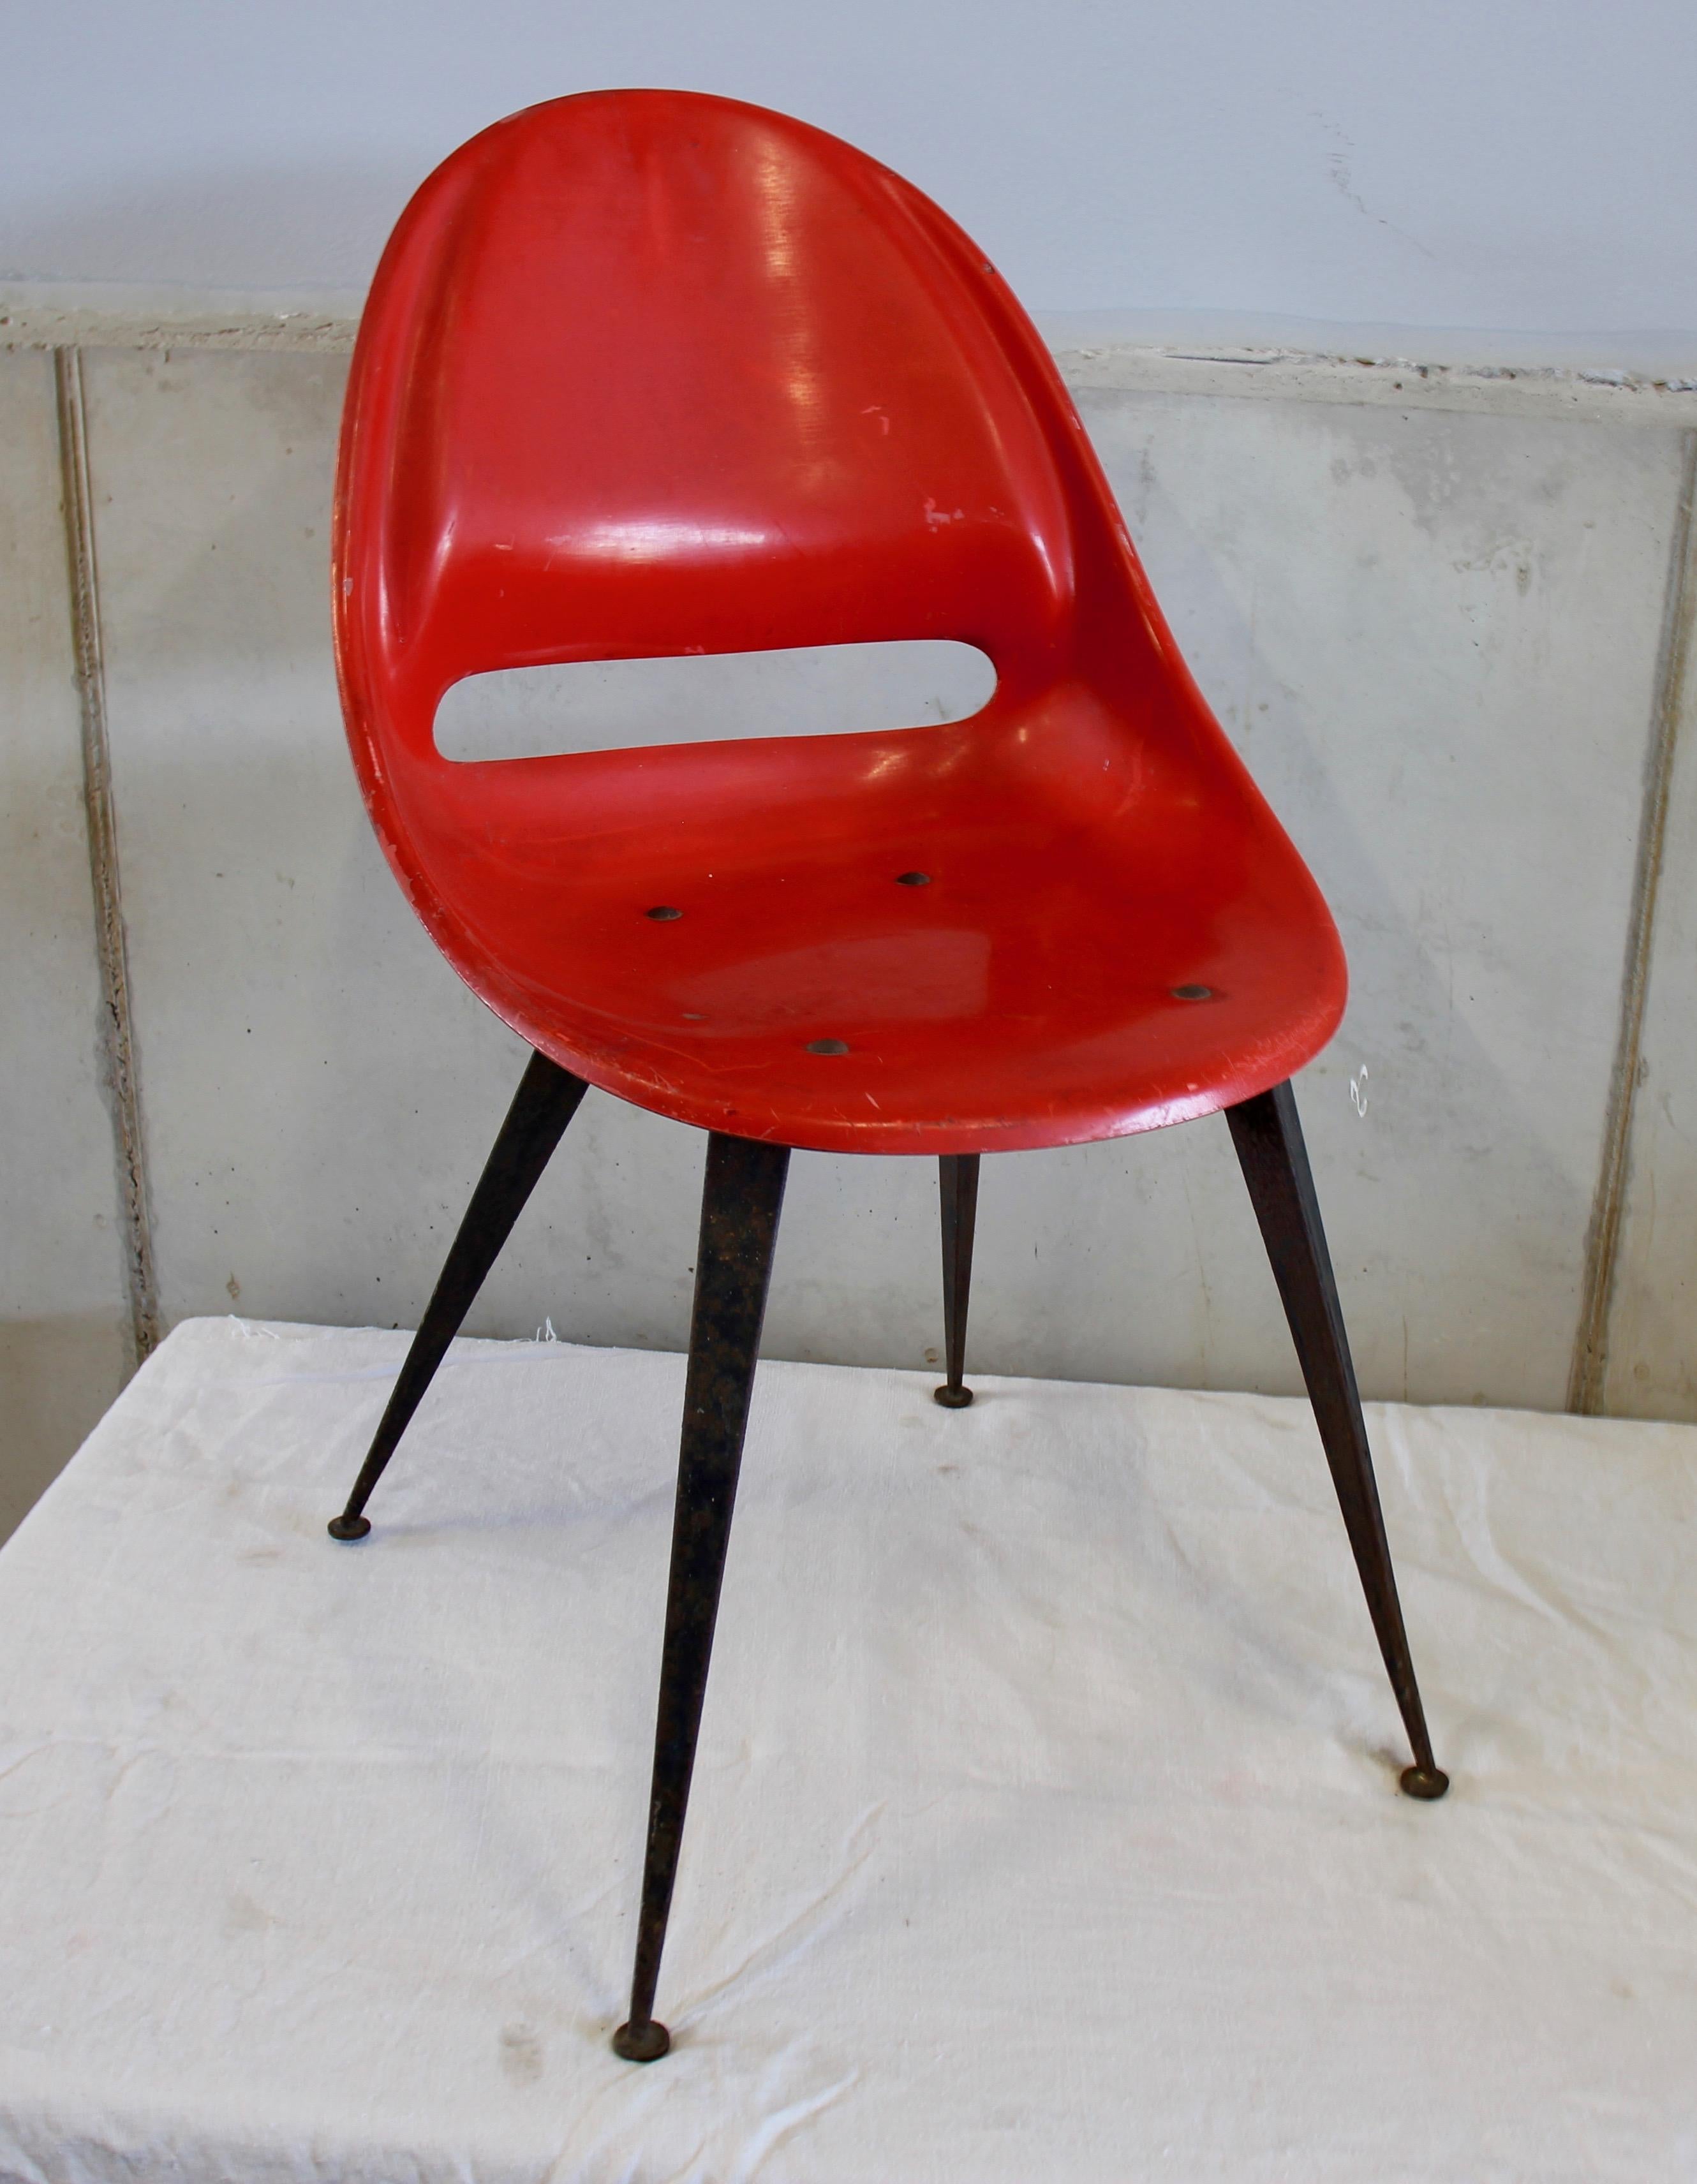 This vibrant red chair made in the 1950s in the Czech republic.
The legs are made out of black painted metal. There are some signs of use on the seatings and there is a bit of rost on the legs. The chairs are very stabile and are a real eyecatcher!